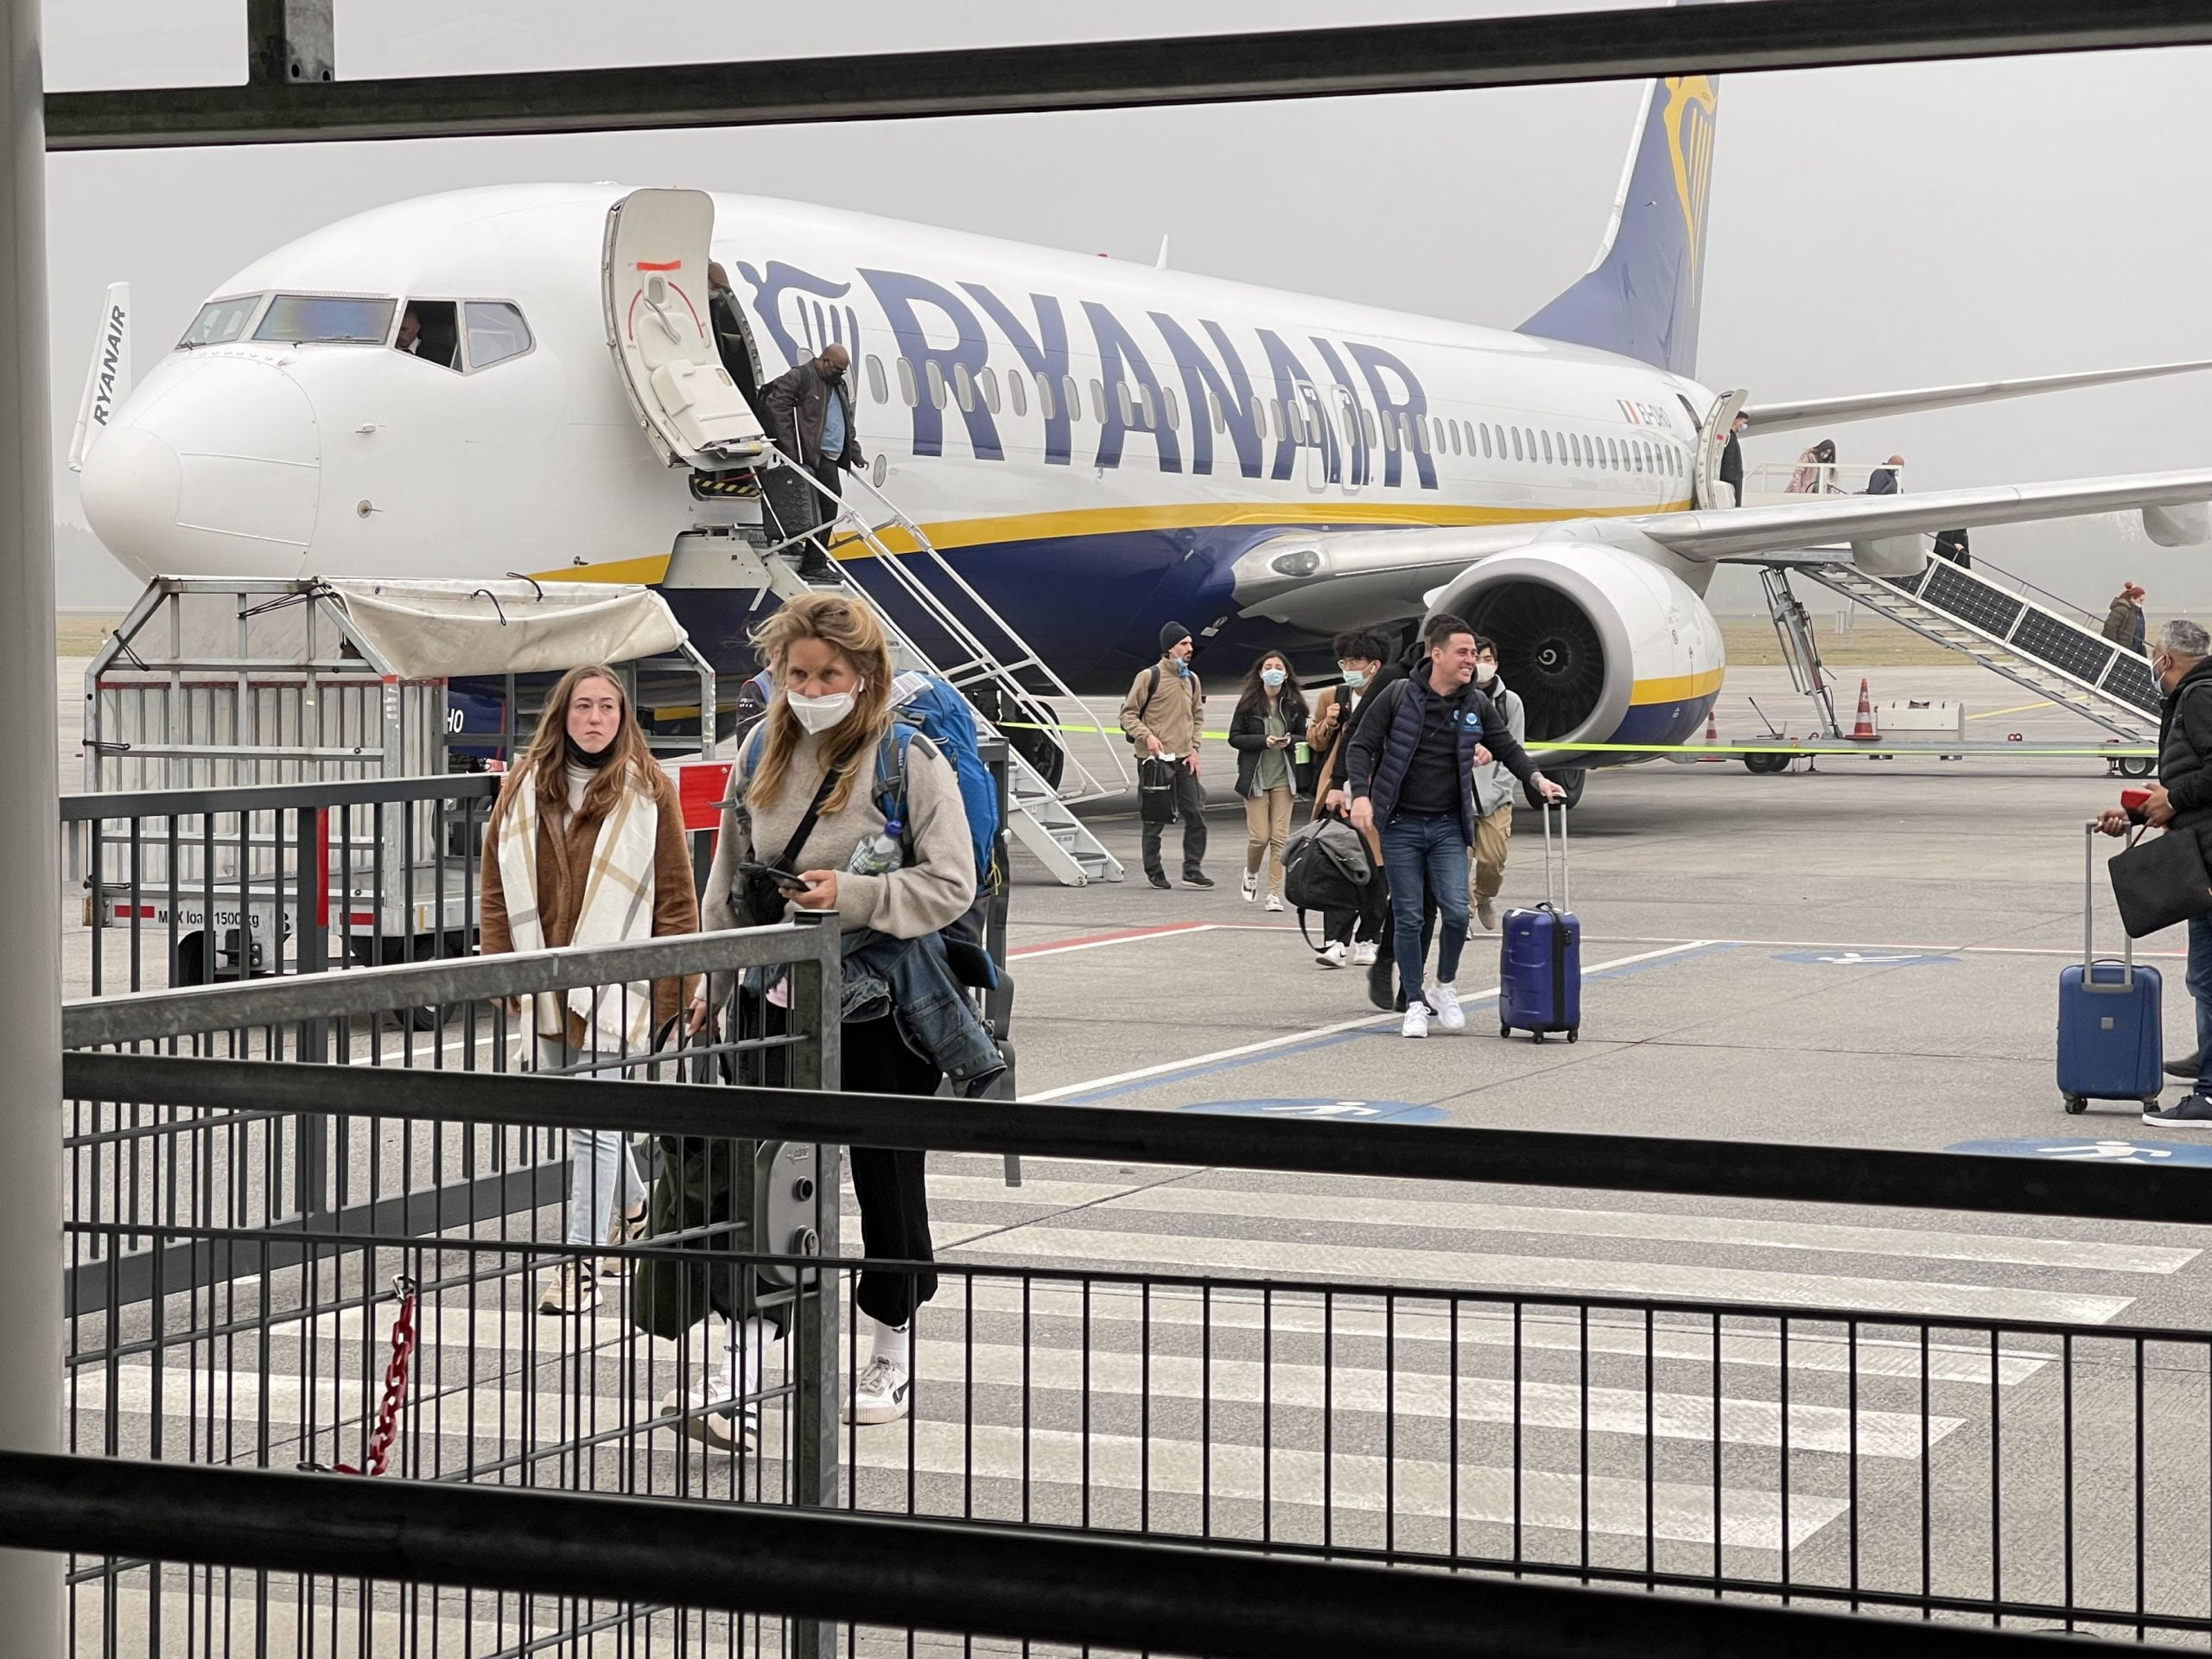 Ryanair tickets will be up to 9% more expensive this summer